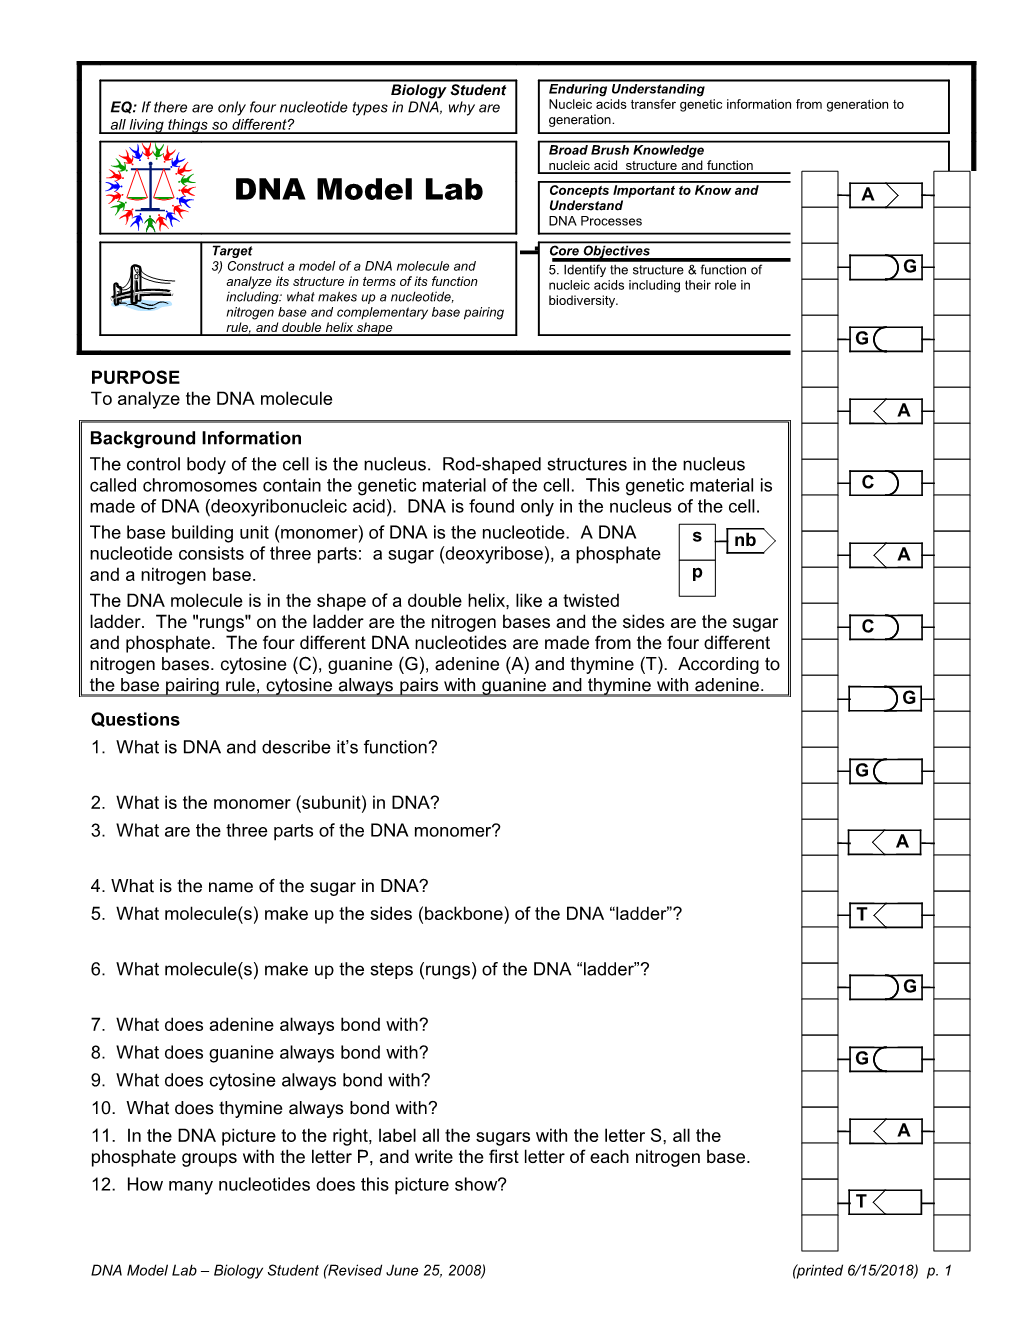 To Analyze the DNA Molecule